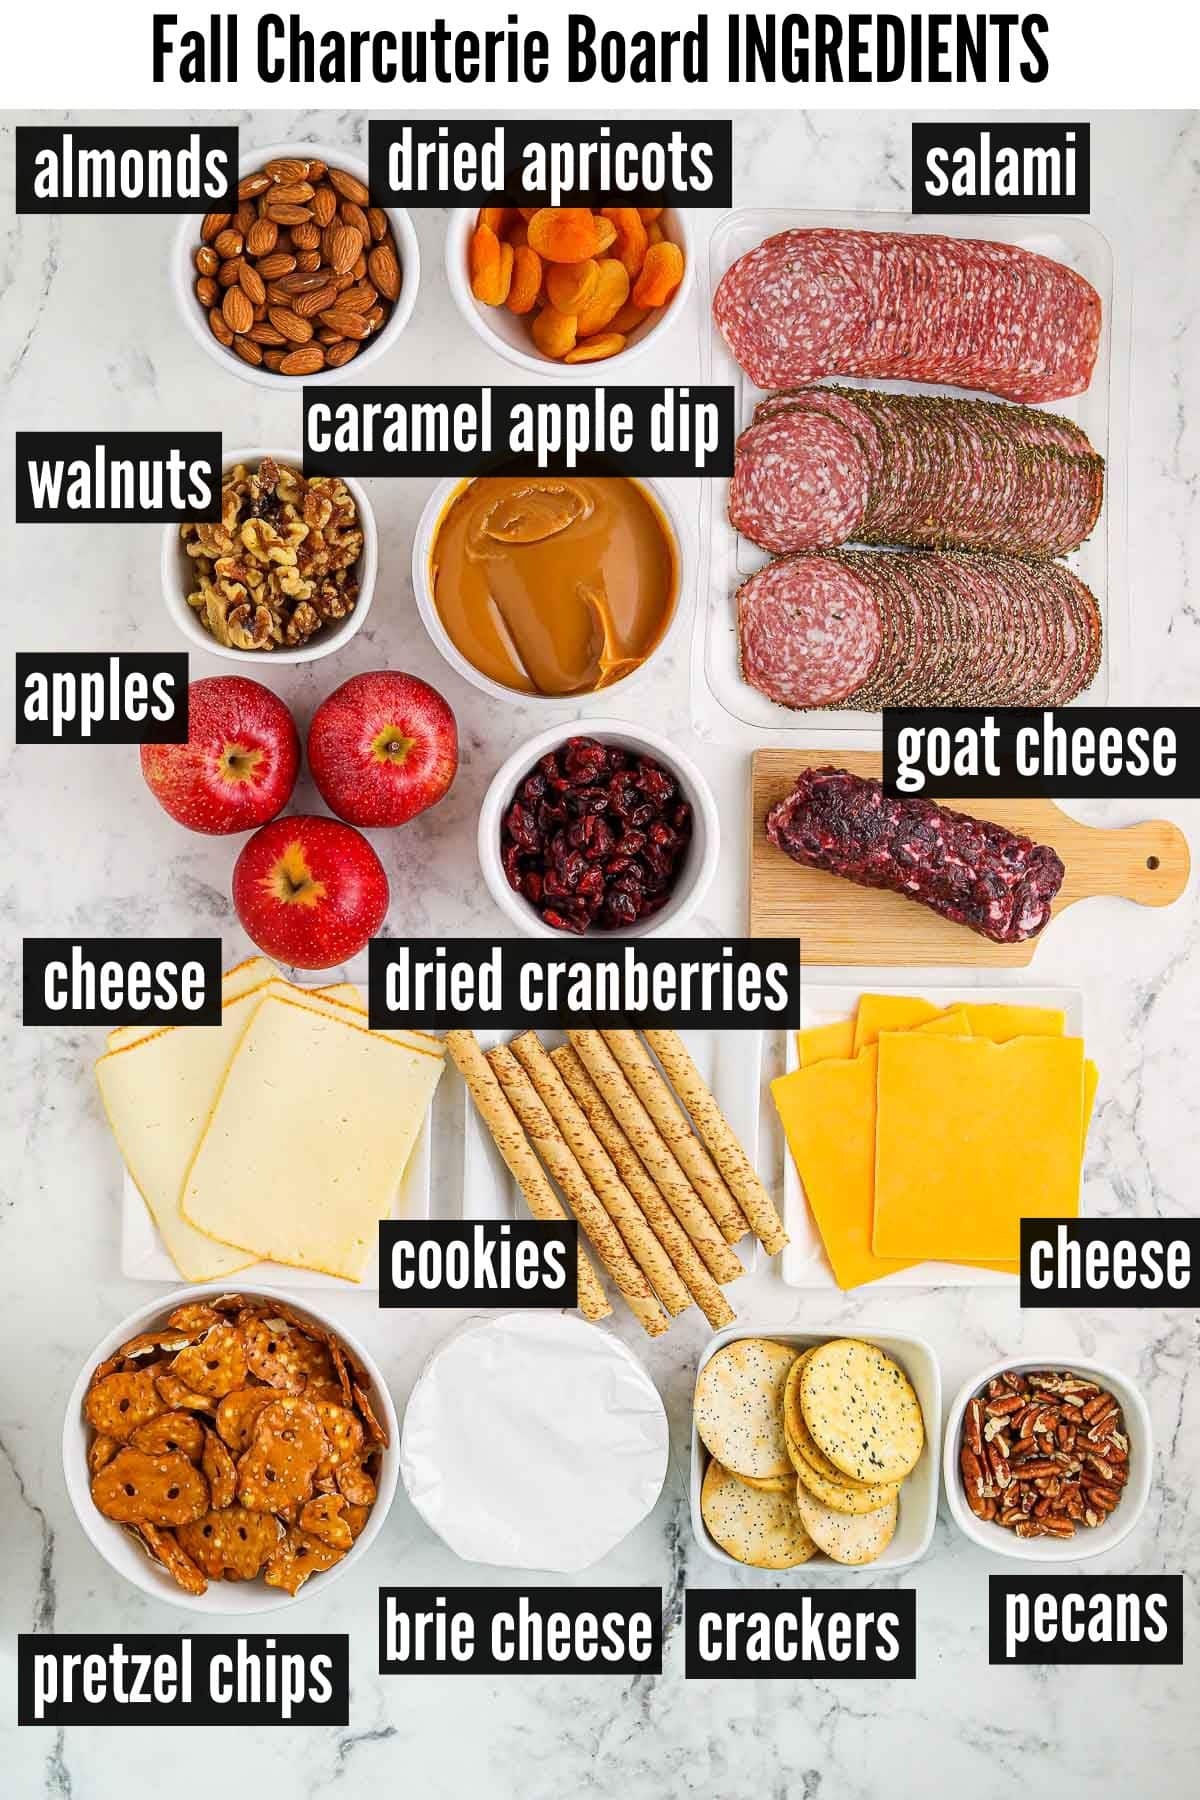 fall charcuterie board labelled ingredients.